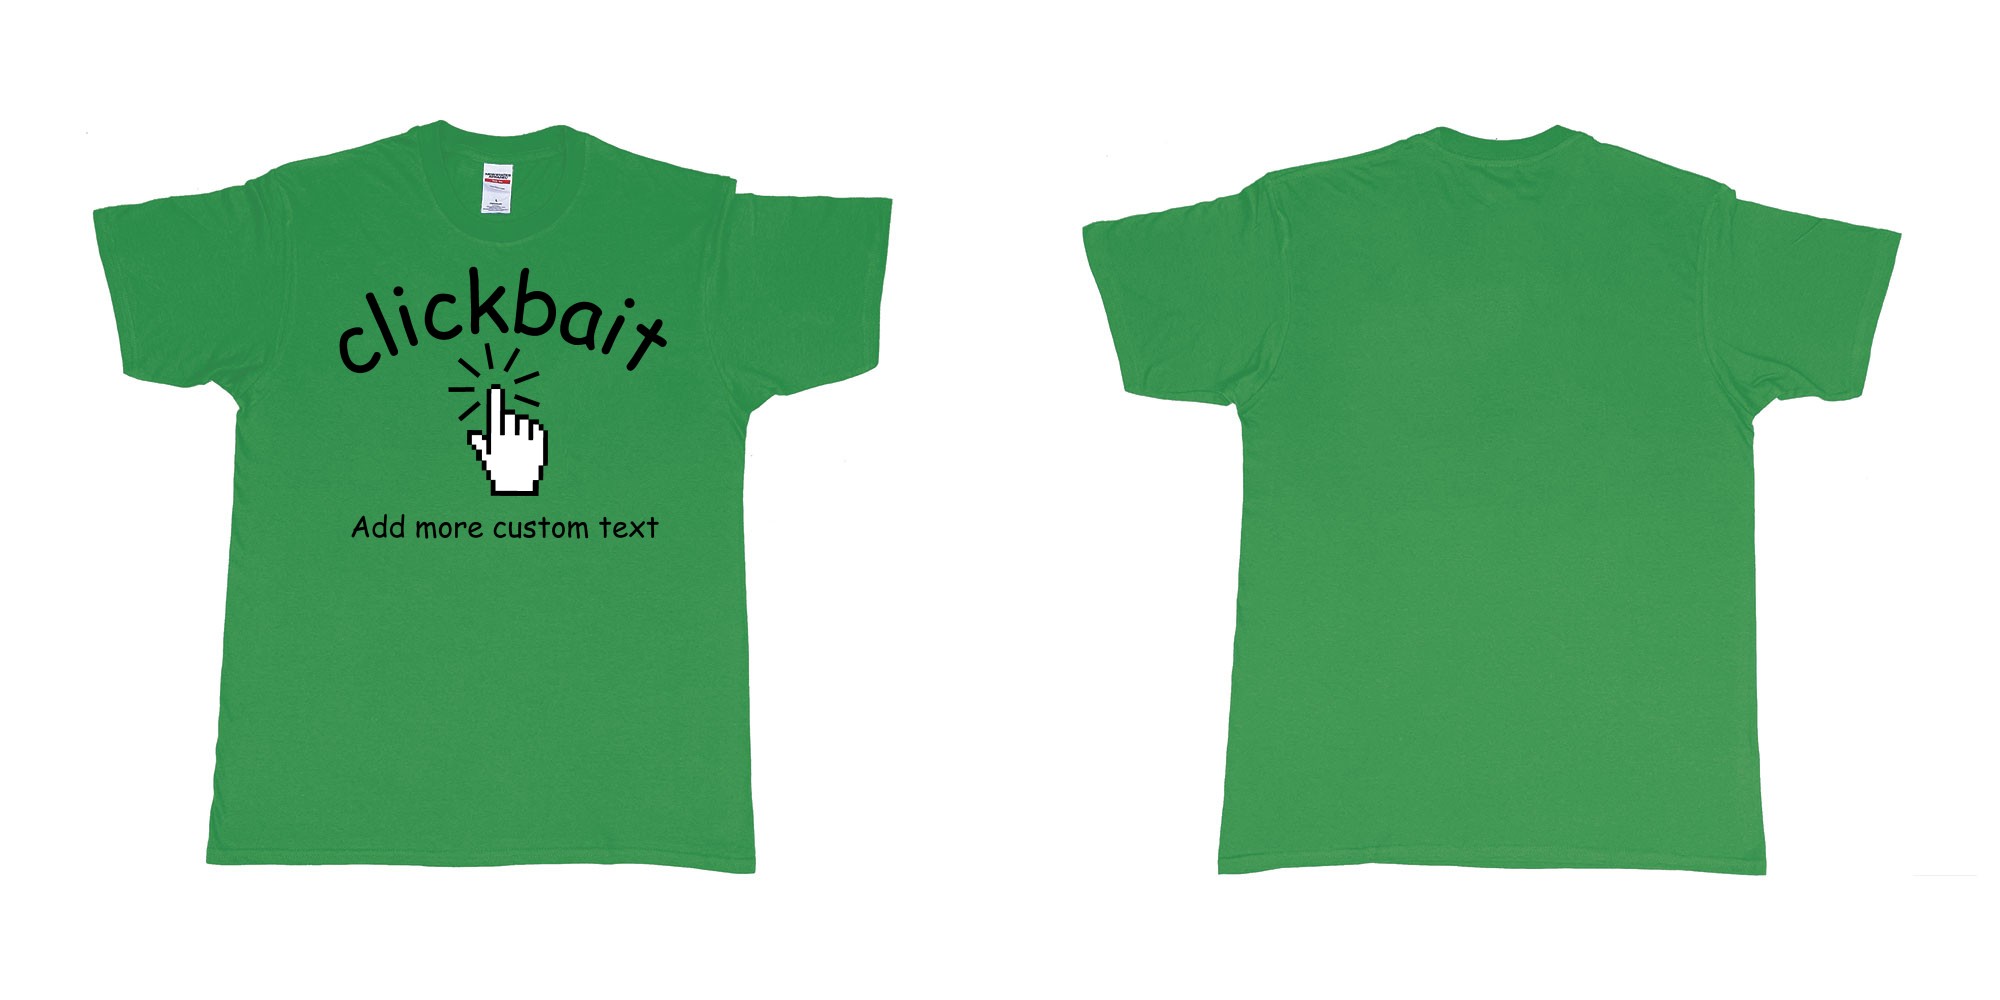 Custom tshirt design clickbait mouse click custom text tshirt printing in fabric color irish-green choice your own text made in Bali by The Pirate Way